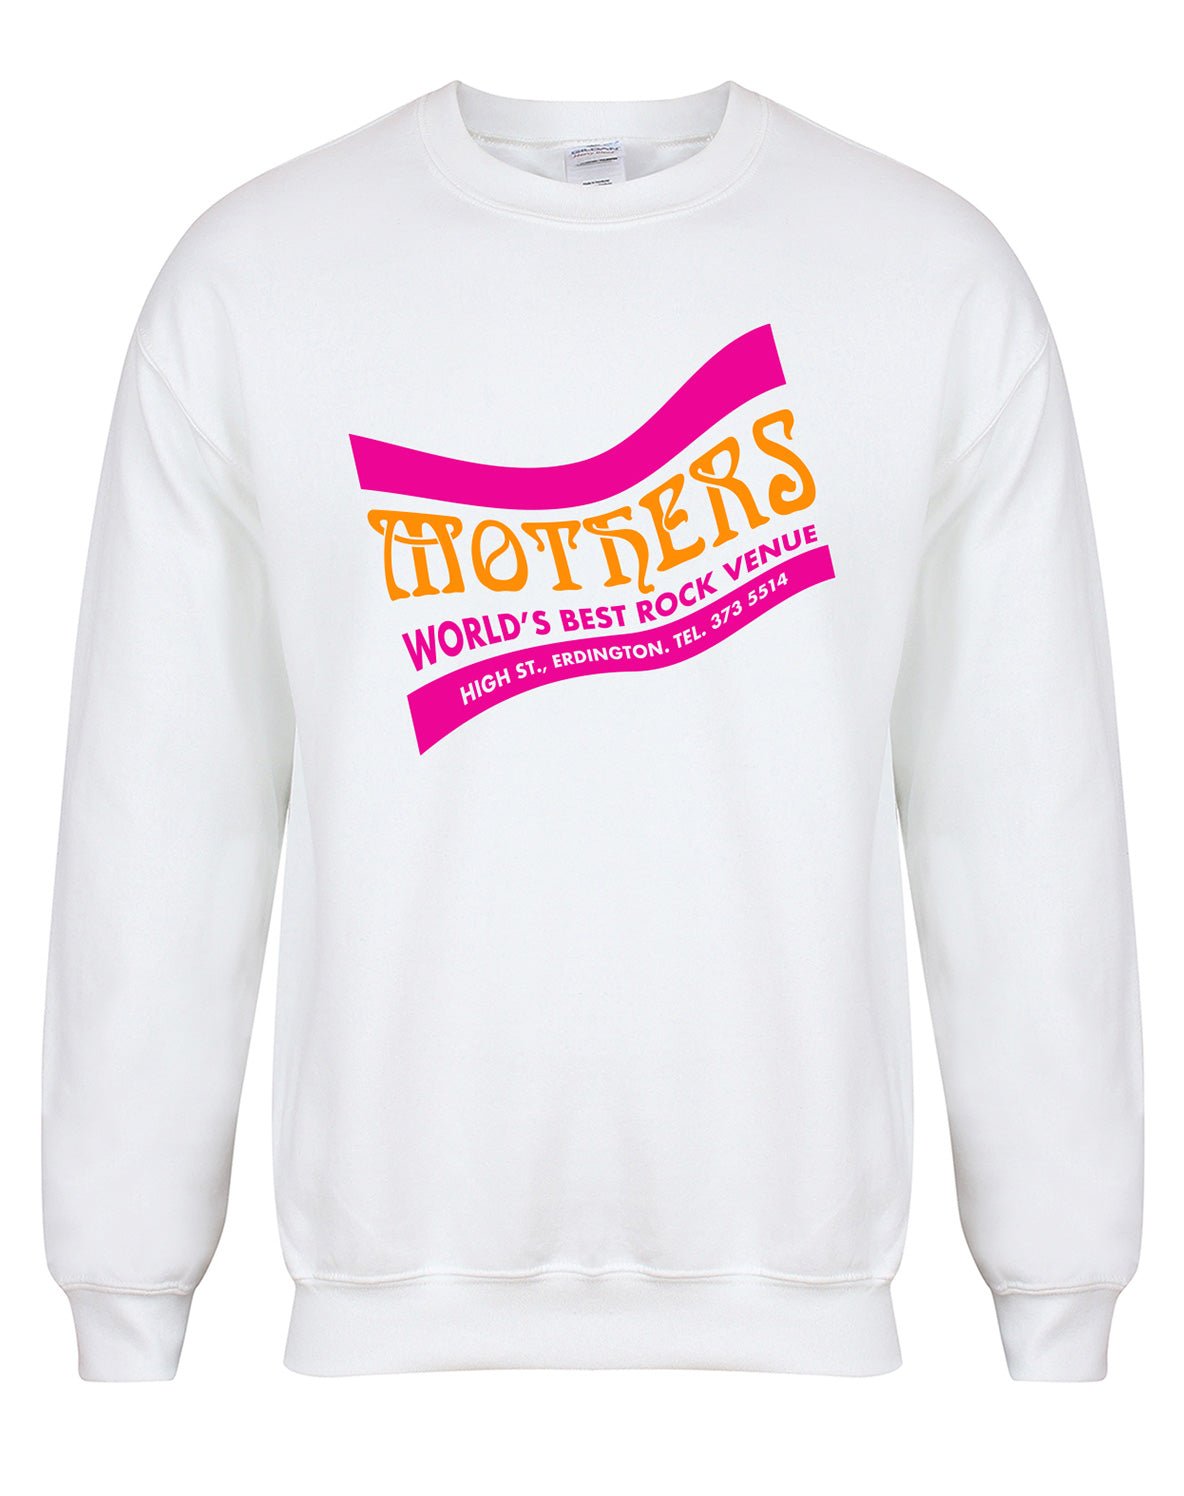 Mothers unisex fit sweatshirt - various colours - Dirty Stop Outs